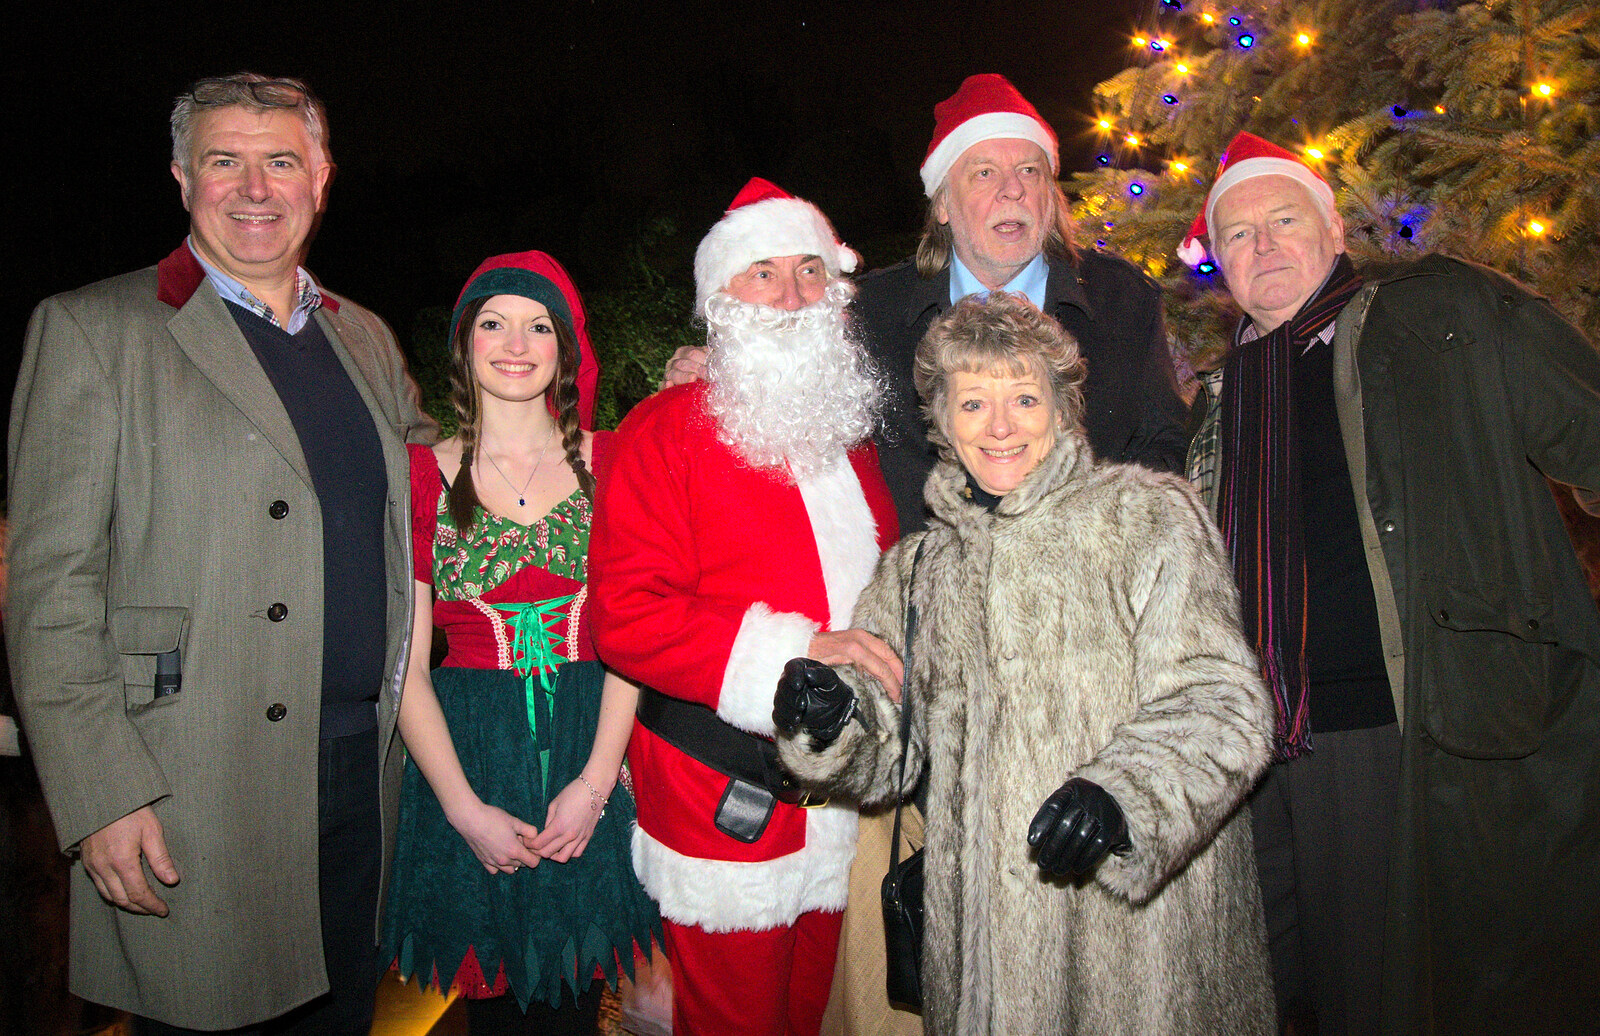 Fraser and the celebs from Rick Wakeman, Ian Lavender and the Christmas lights, The Oaksmere, Suffolk - 4th December 2014